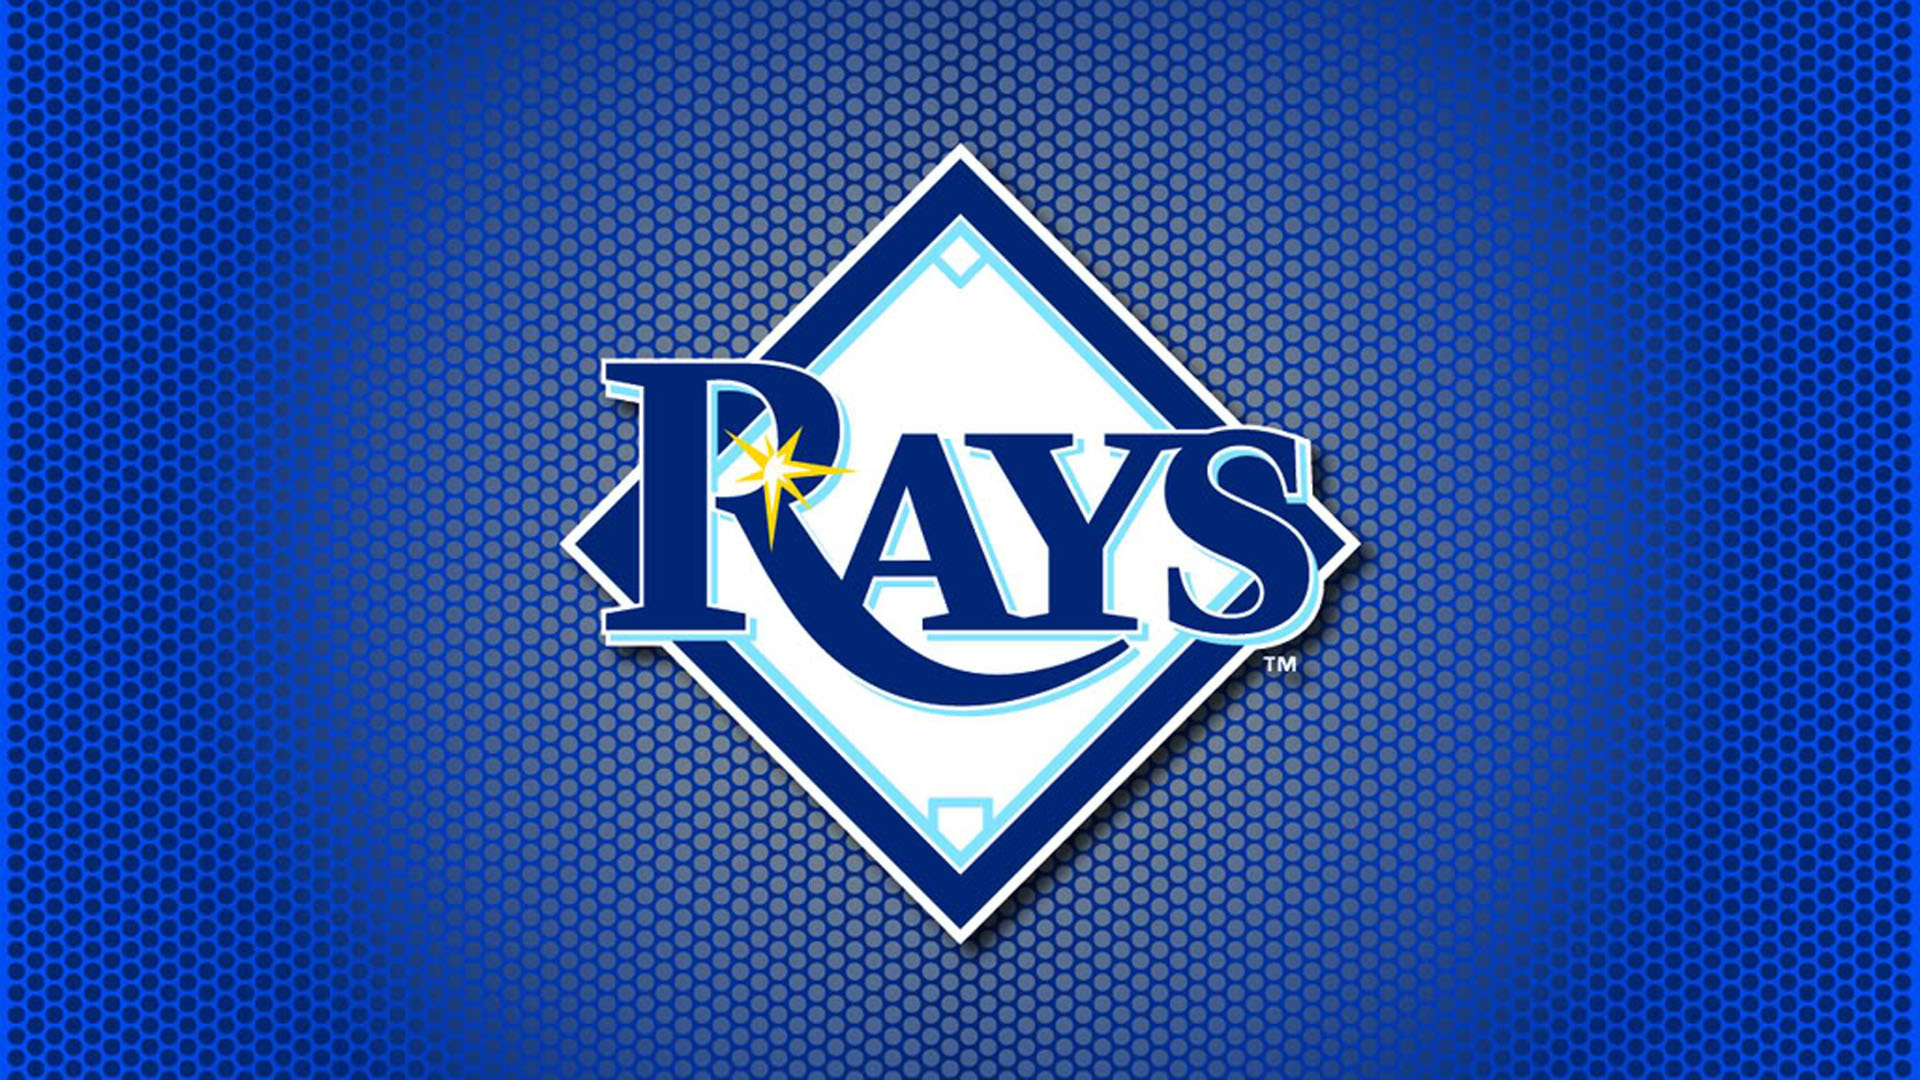  on tampa bay rays wallpapers